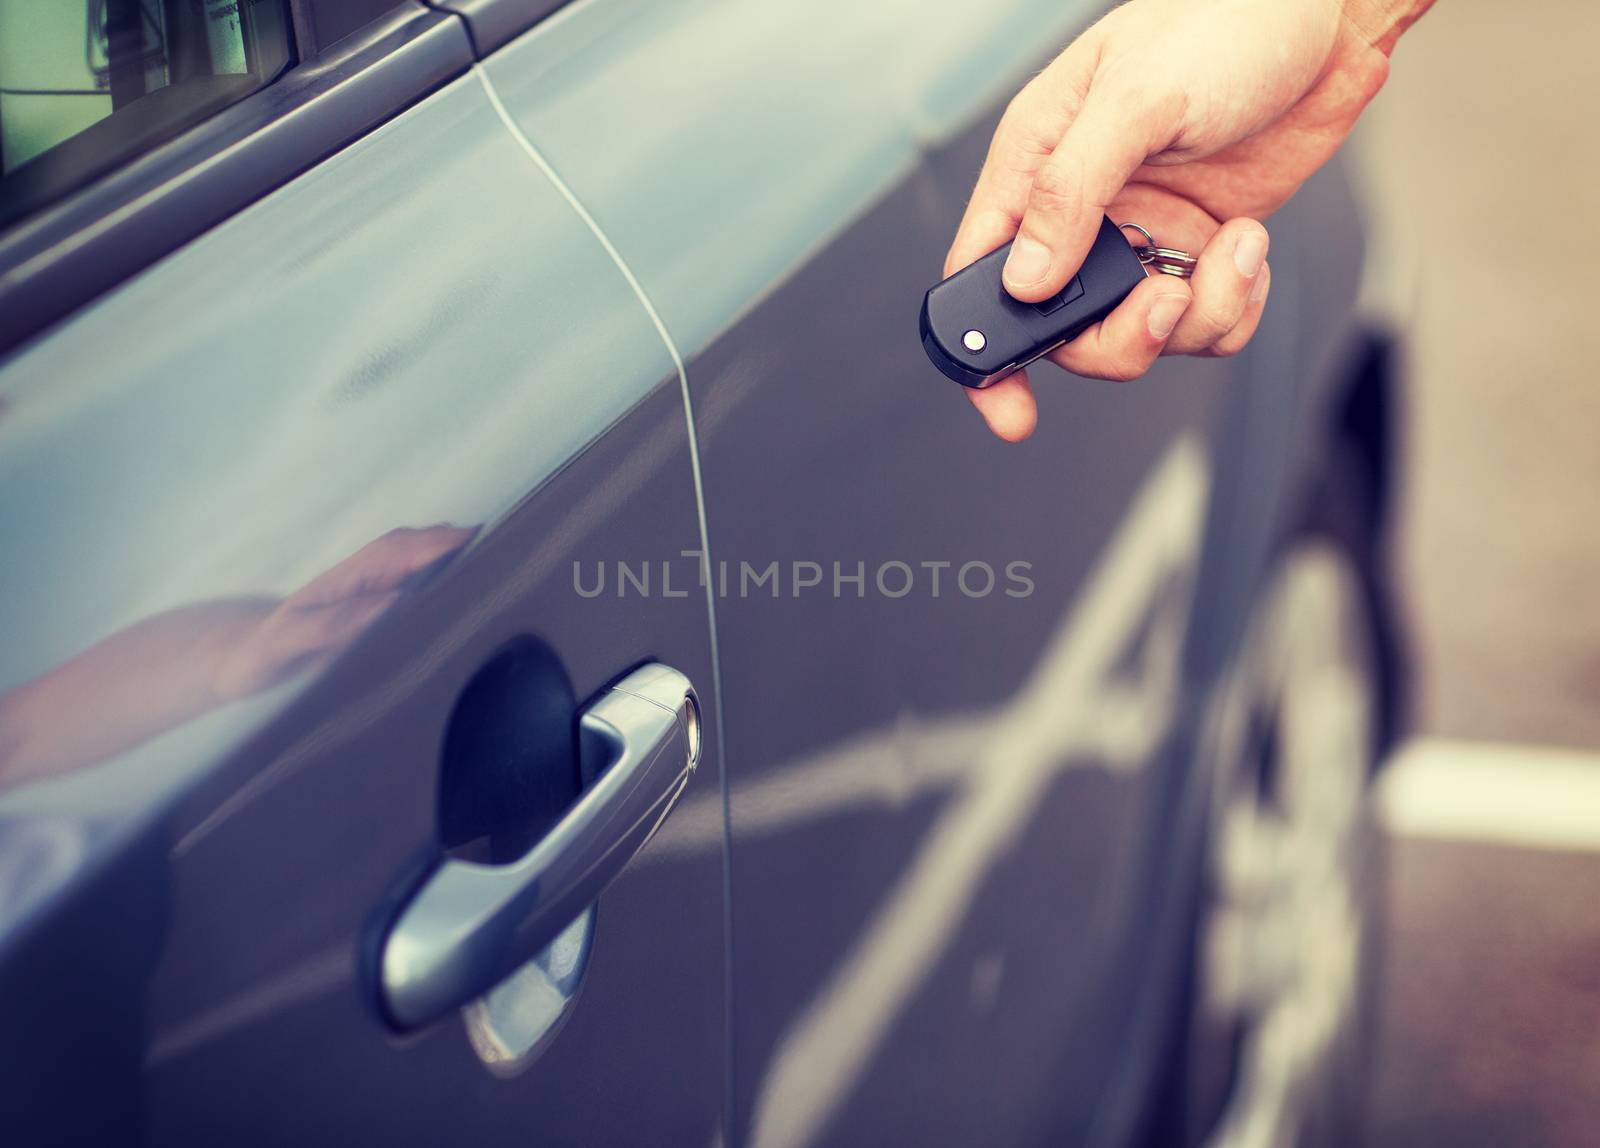 transportation and ownership concept - man with car key outside